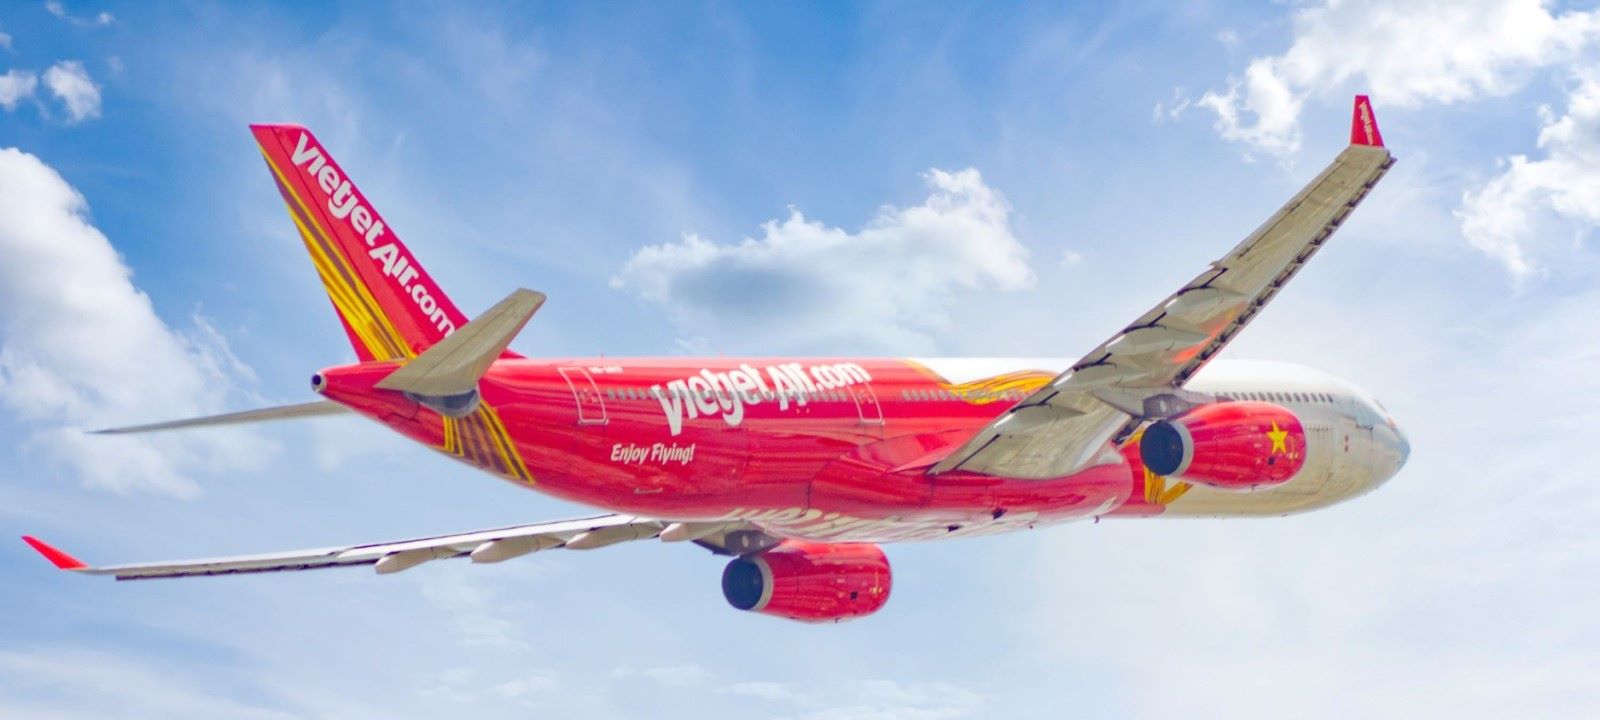 Vietjet climbs to the top 50 in Forbes Vietnam's prestigious list, fueled by record revenue and impressive growth.